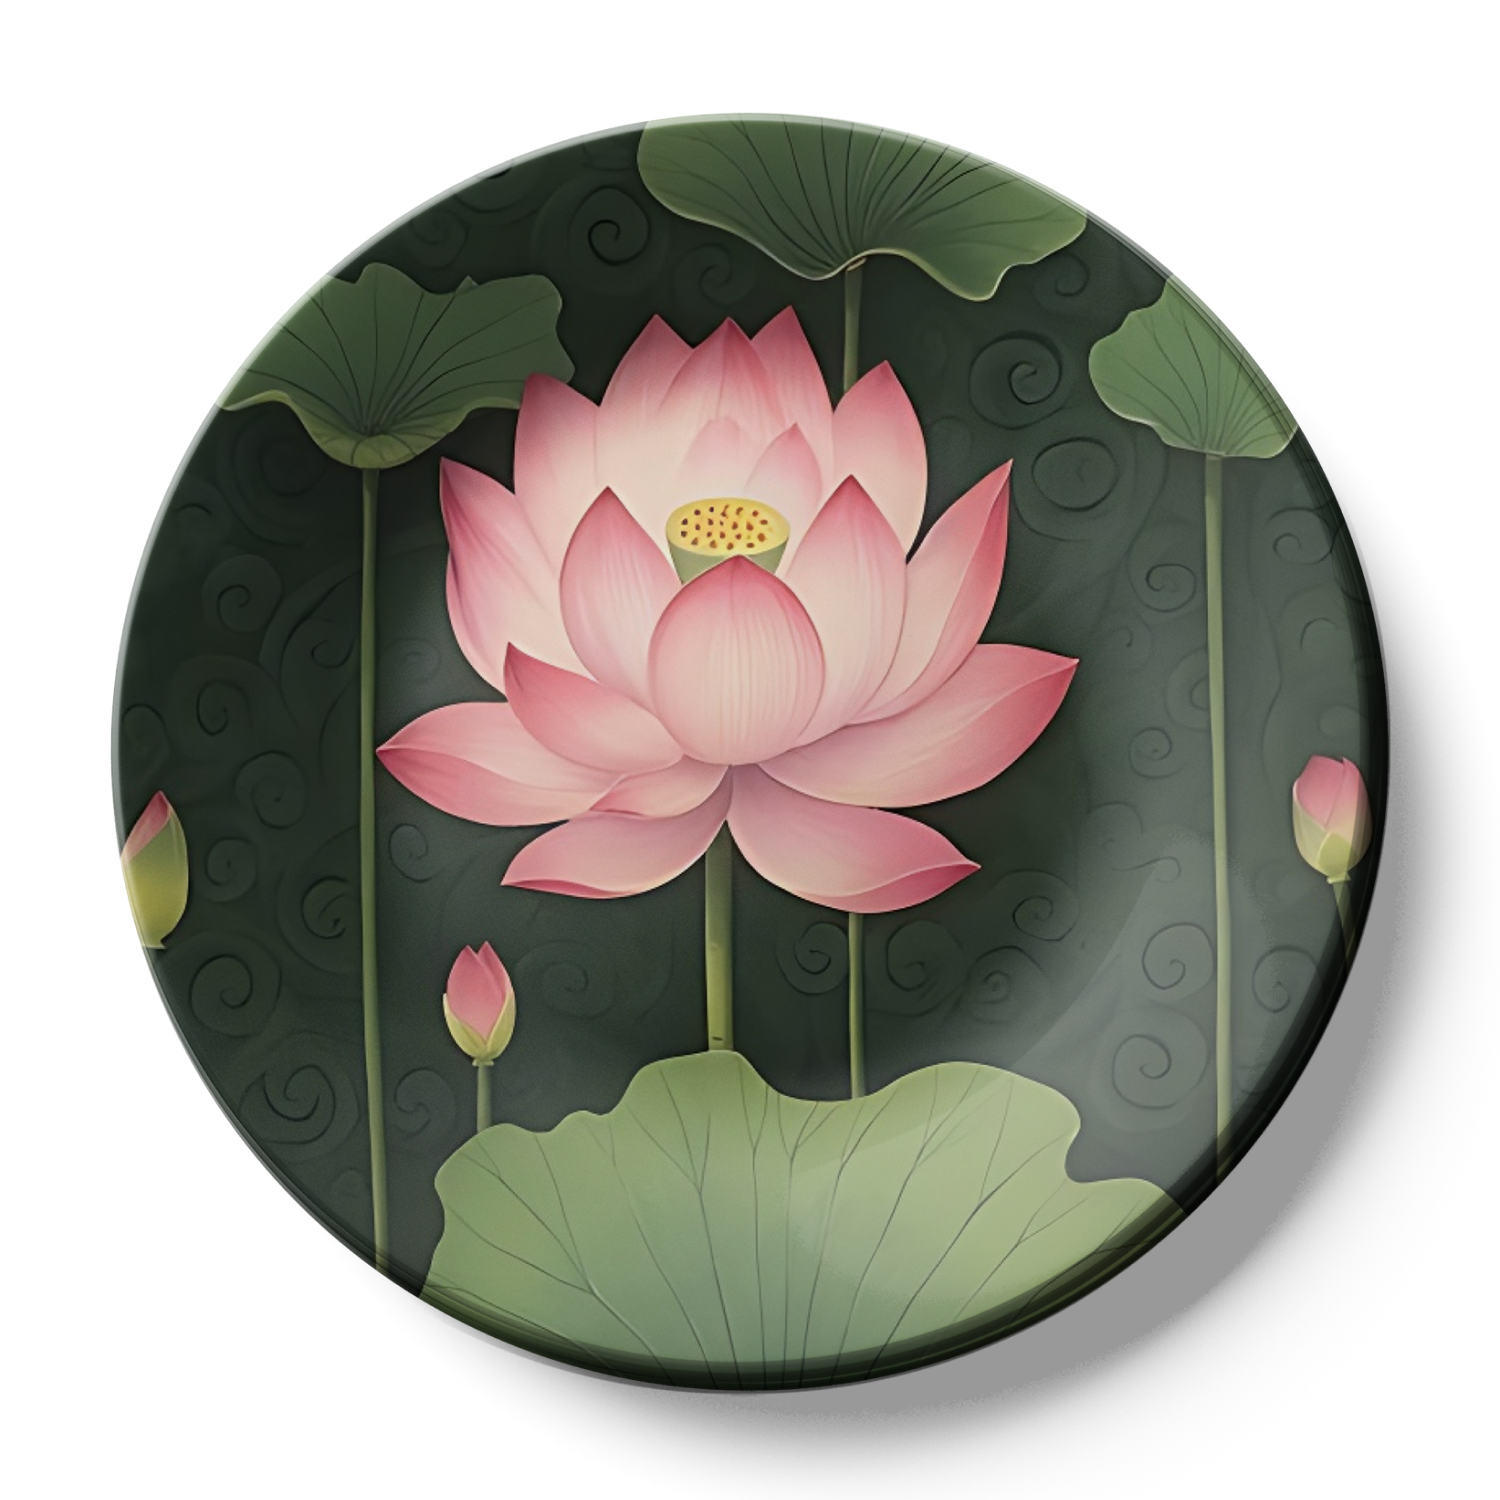 pink lotus flower decorative plates for home decor